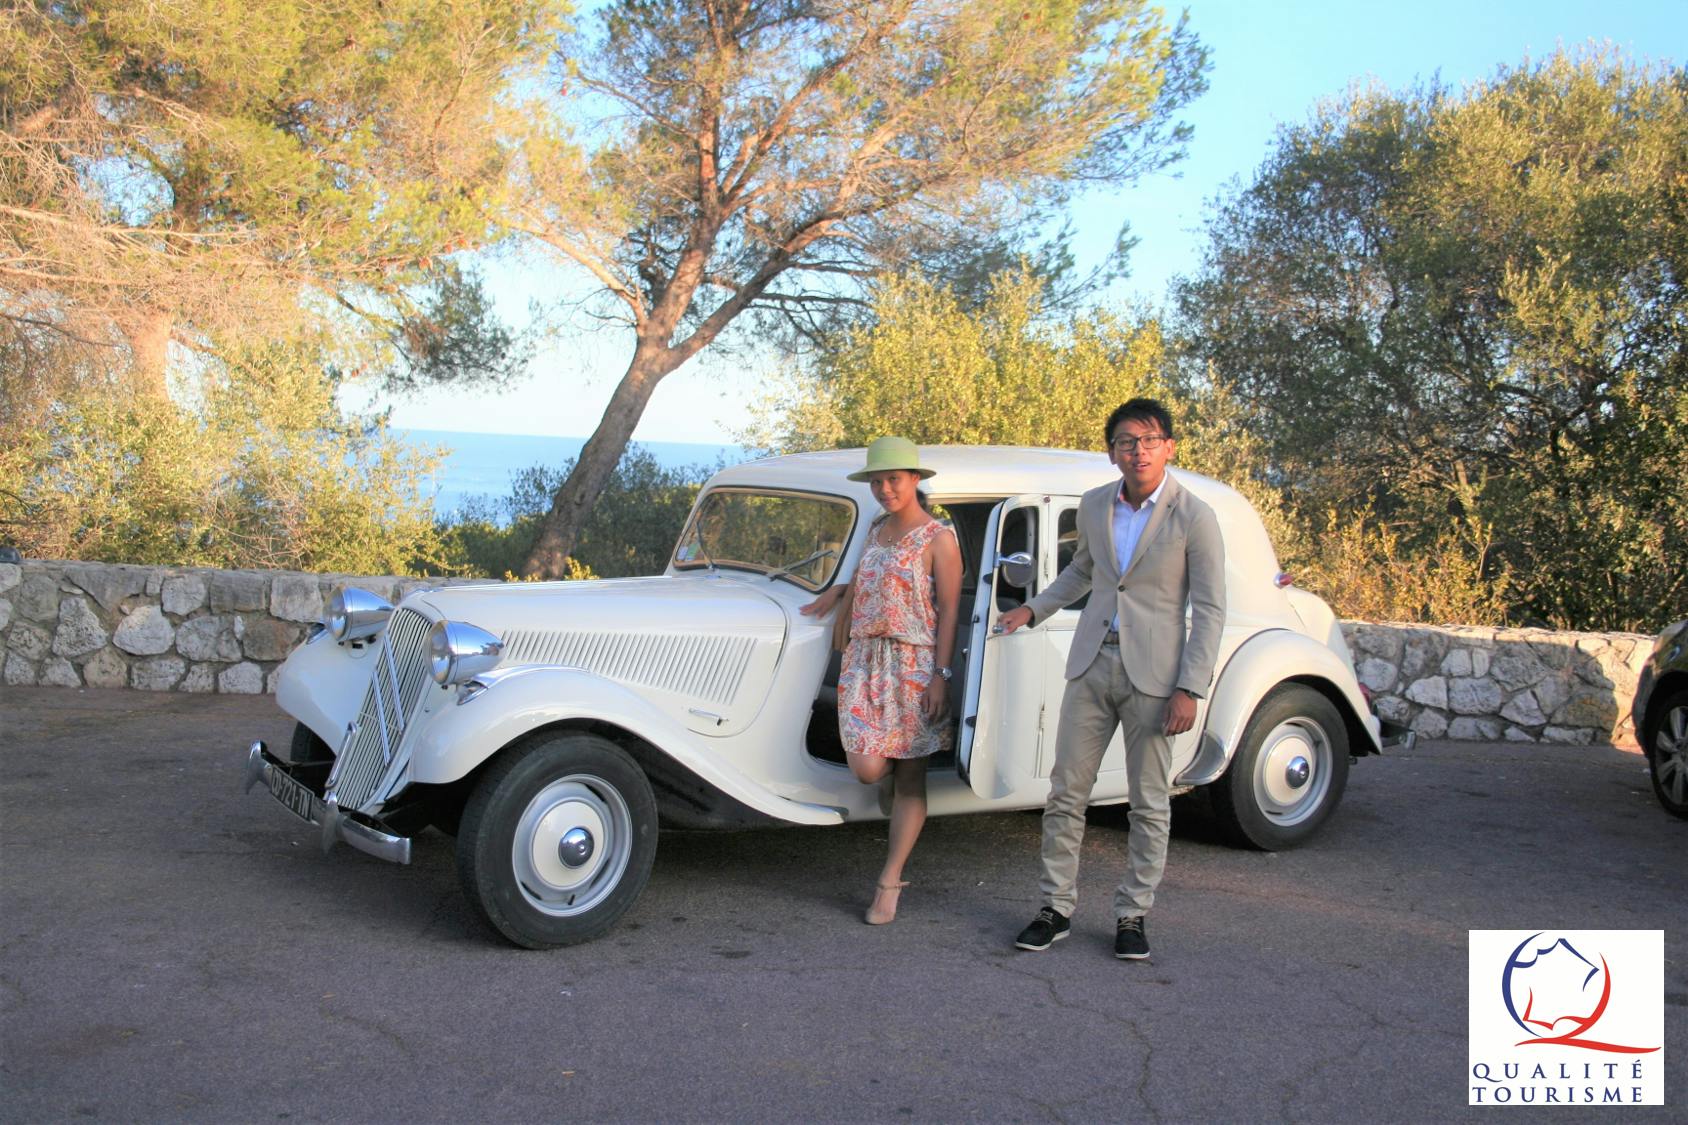 French Riviera tour in a vintage car from Cannes Musement